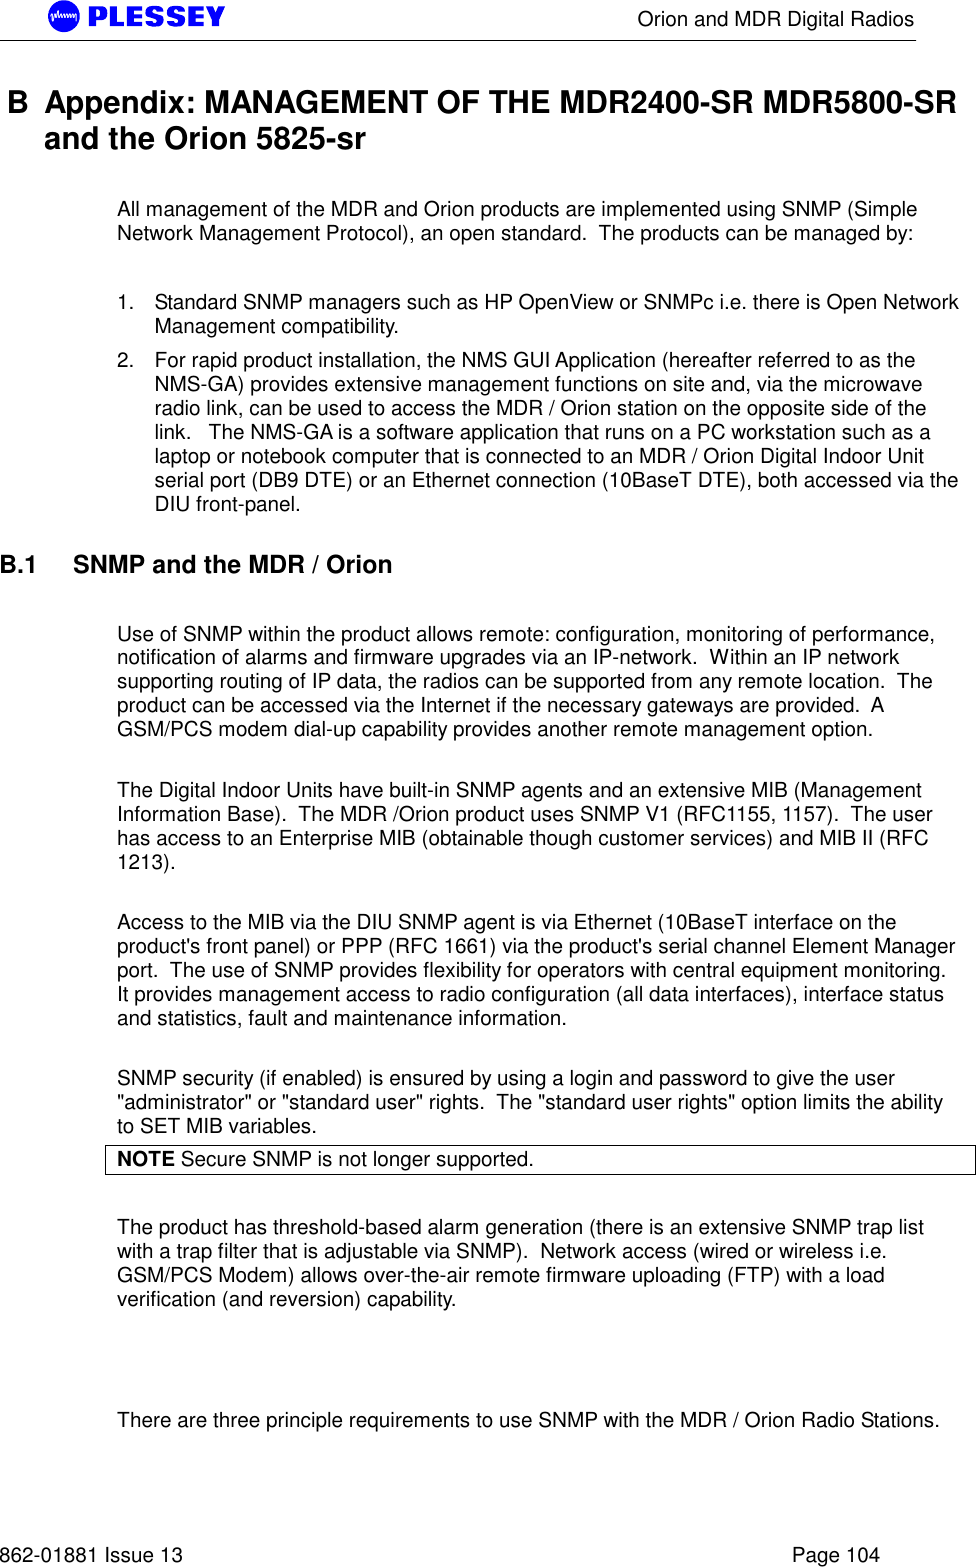      Orion and MDR Digital Radios   862-01881 Issue 13    Page 104 B  Appendix: MANAGEMENT OF THE MDR2400-SR MDR5800-SR and the Orion 5825-sr  All management of the MDR and Orion products are implemented using SNMP (Simple Network Management Protocol), an open standard.  The products can be managed by:   1.  Standard SNMP managers such as HP OpenView or SNMPc i.e. there is Open Network Management compatibility.  2.  For rapid product installation, the NMS GUI Application (hereafter referred to as the NMS-GA) provides extensive management functions on site and, via the microwave radio link, can be used to access the MDR / Orion station on the opposite side of the link.   The NMS-GA is a software application that runs on a PC workstation such as a laptop or notebook computer that is connected to an MDR / Orion Digital Indoor Unit serial port (DB9 DTE) or an Ethernet connection (10BaseT DTE), both accessed via the DIU front-panel.     B.1    SNMP and the MDR / Orion  Use of SNMP within the product allows remote: configuration, monitoring of performance, notification of alarms and firmware upgrades via an IP-network.  Within an IP network supporting routing of IP data, the radios can be supported from any remote location.  The product can be accessed via the Internet if the necessary gateways are provided.  A GSM/PCS modem dial-up capability provides another remote management option.    The Digital Indoor Units have built-in SNMP agents and an extensive MIB (Management Information Base).  The MDR /Orion product uses SNMP V1 (RFC1155, 1157).  The user has access to an Enterprise MIB (obtainable though customer services) and MIB II (RFC 1213).     Access to the MIB via the DIU SNMP agent is via Ethernet (10BaseT interface on the product&apos;s front panel) or PPP (RFC 1661) via the product&apos;s serial channel Element Manager port.  The use of SNMP provides flexibility for operators with central equipment monitoring.  It provides management access to radio configuration (all data interfaces), interface status and statistics, fault and maintenance information.    SNMP security (if enabled) is ensured by using a login and password to give the user &quot;administrator&quot; or &quot;standard user&quot; rights.  The &quot;standard user rights&quot; option limits the ability to SET MIB variables.   NOTE Secure SNMP is not longer supported.  The product has threshold-based alarm generation (there is an extensive SNMP trap list with a trap filter that is adjustable via SNMP).  Network access (wired or wireless i.e. GSM/PCS Modem) allows over-the-air remote firmware uploading (FTP) with a load verification (and reversion) capability.      There are three principle requirements to use SNMP with the MDR / Orion Radio Stations.    